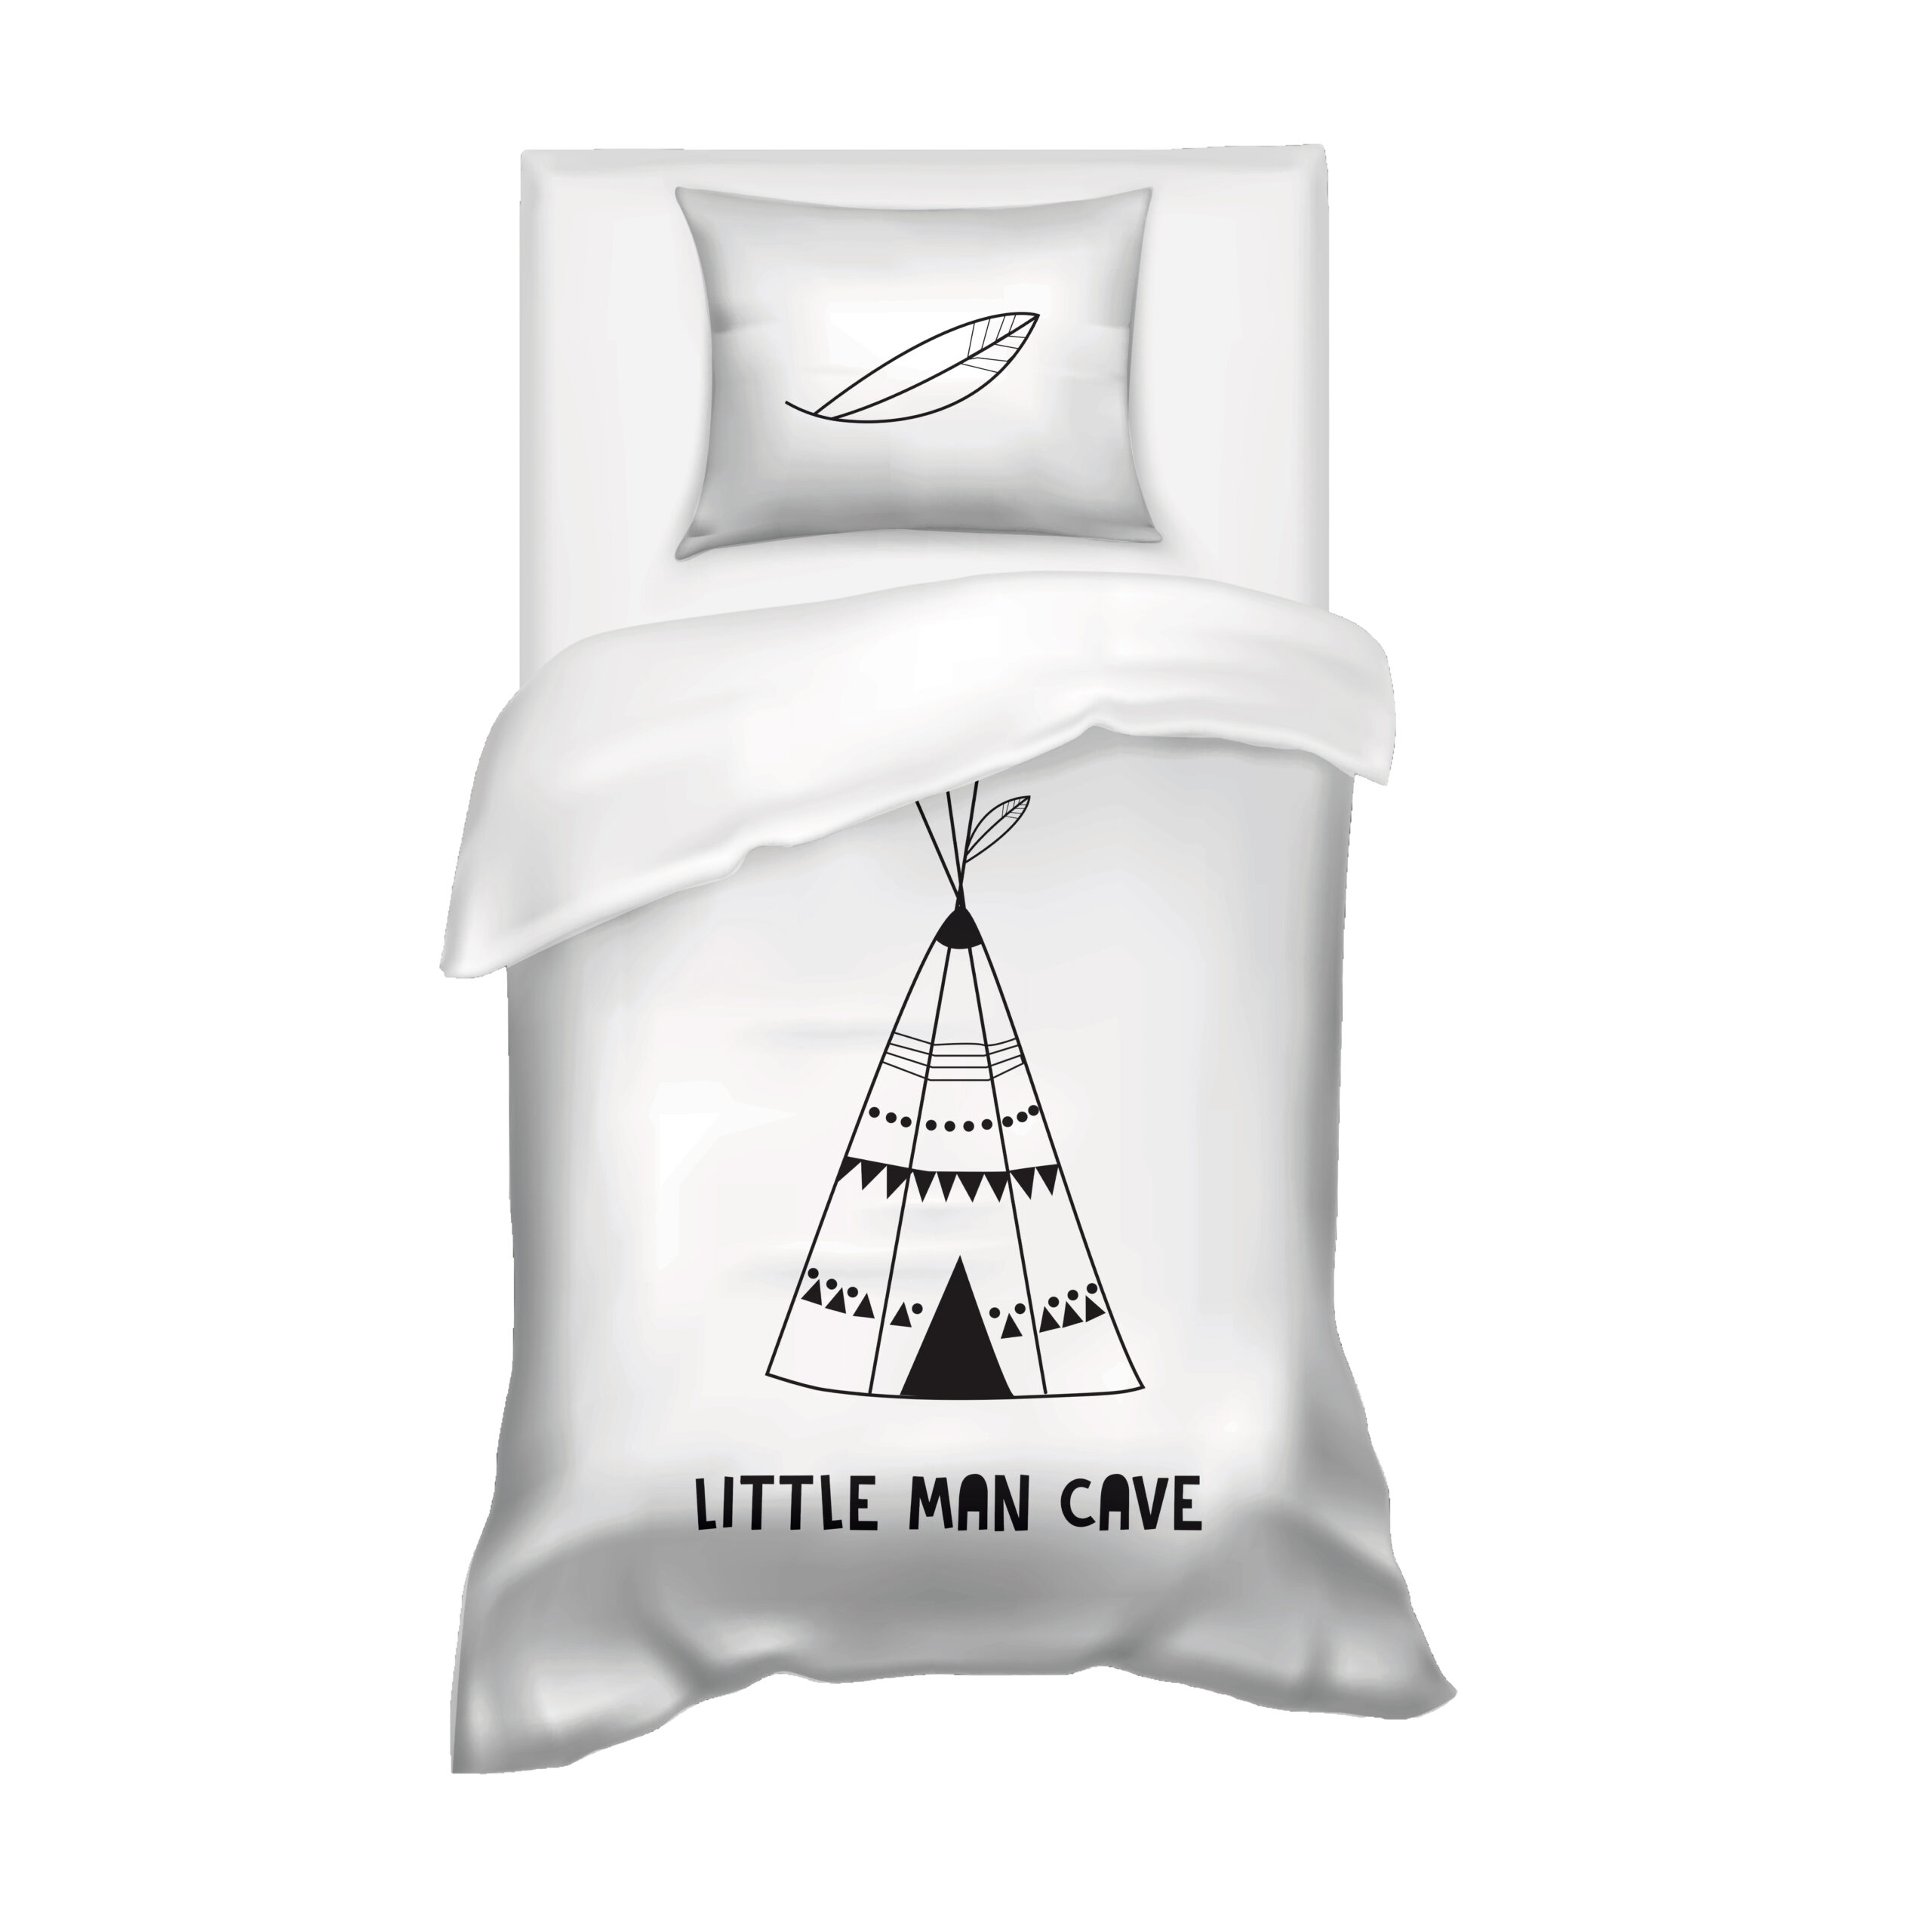 Villa Madelief 140 x 220cm White Little Man Cave Duvet Cover with 1 Pillowcase